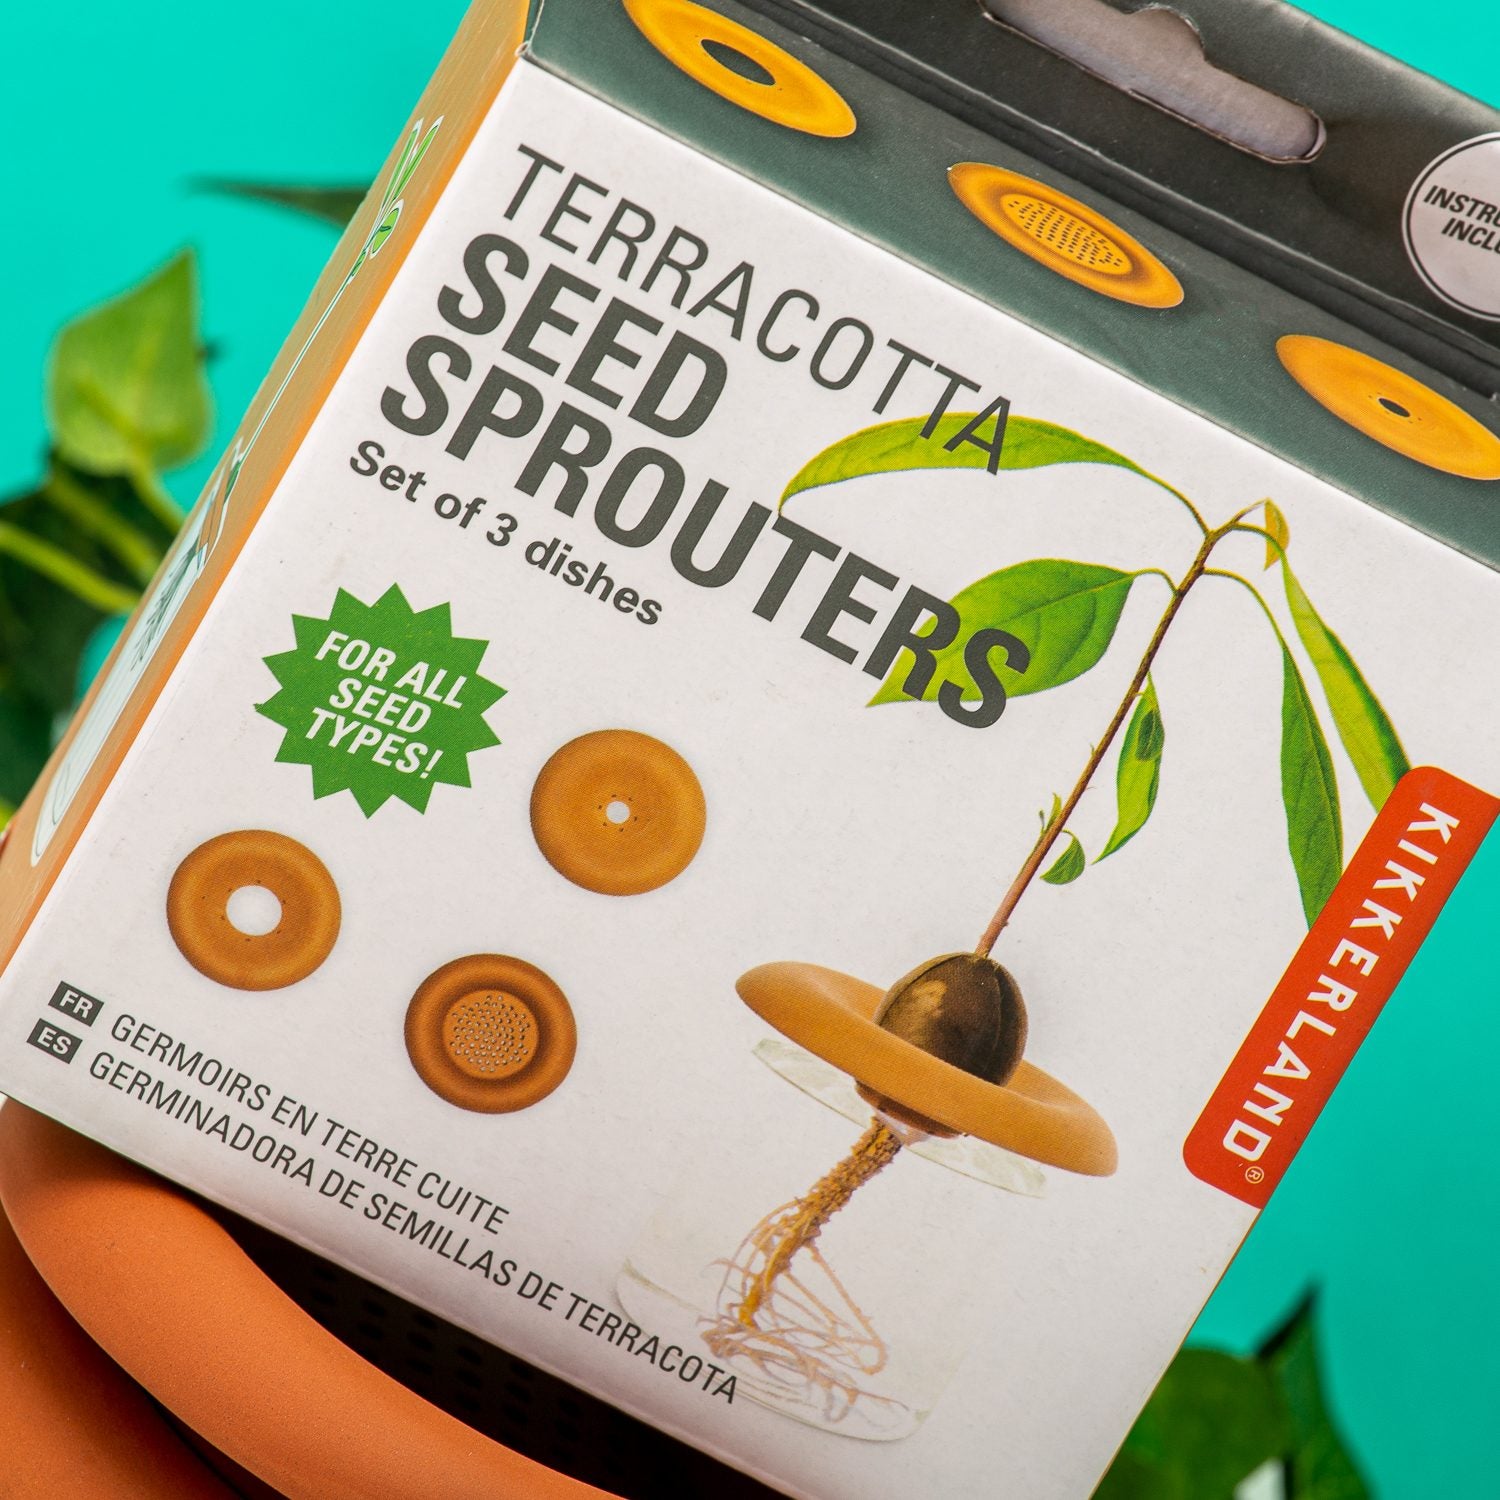 Terracotta Seed Sprouter